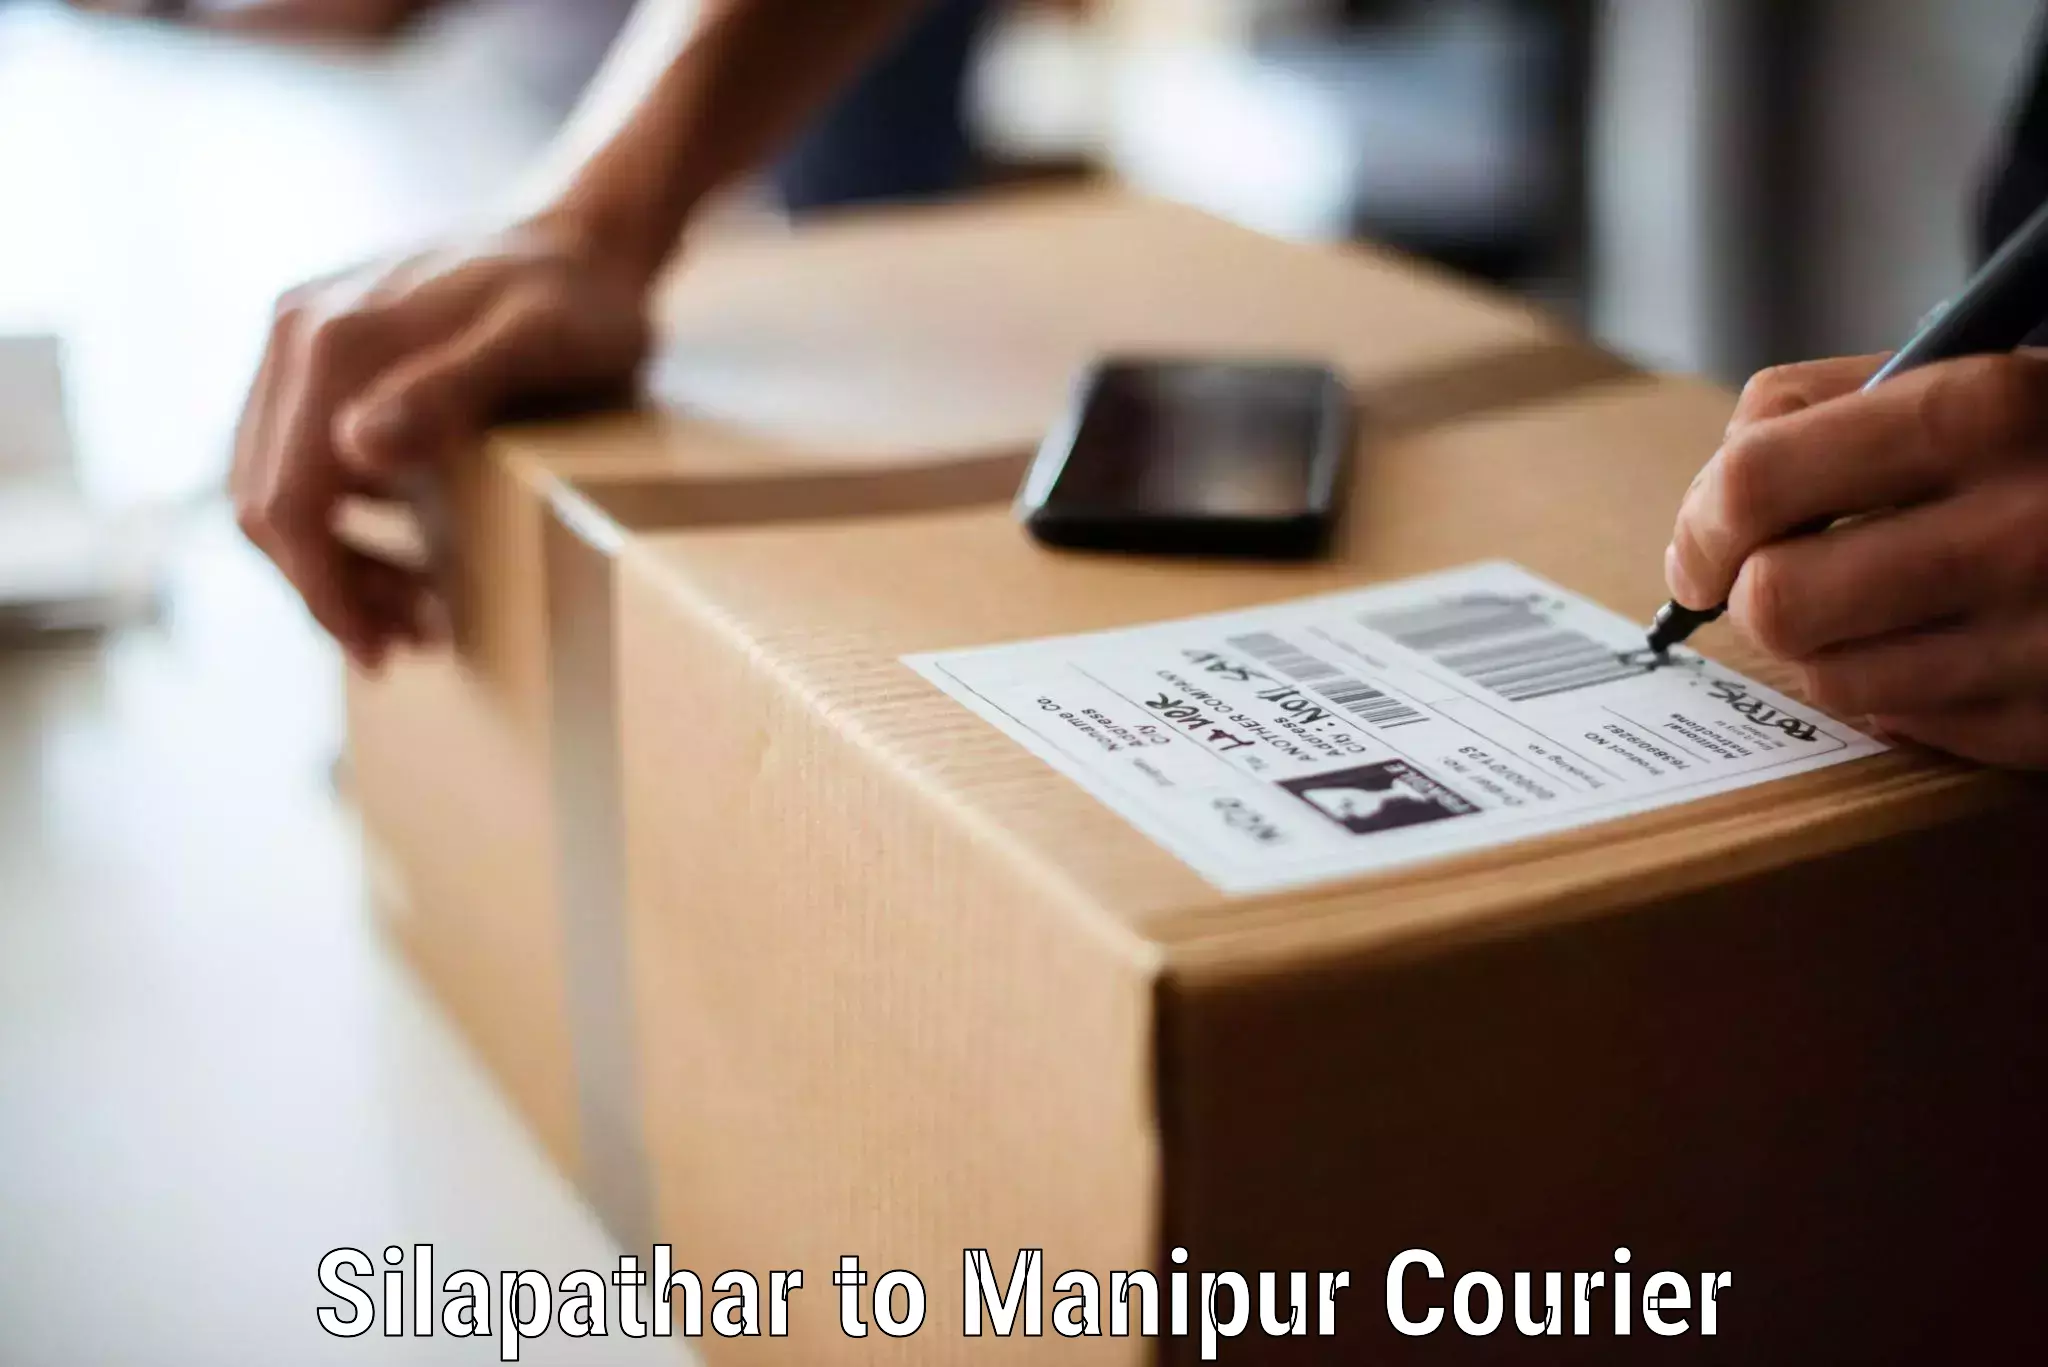 Furniture transport and storage Silapathar to Manipur